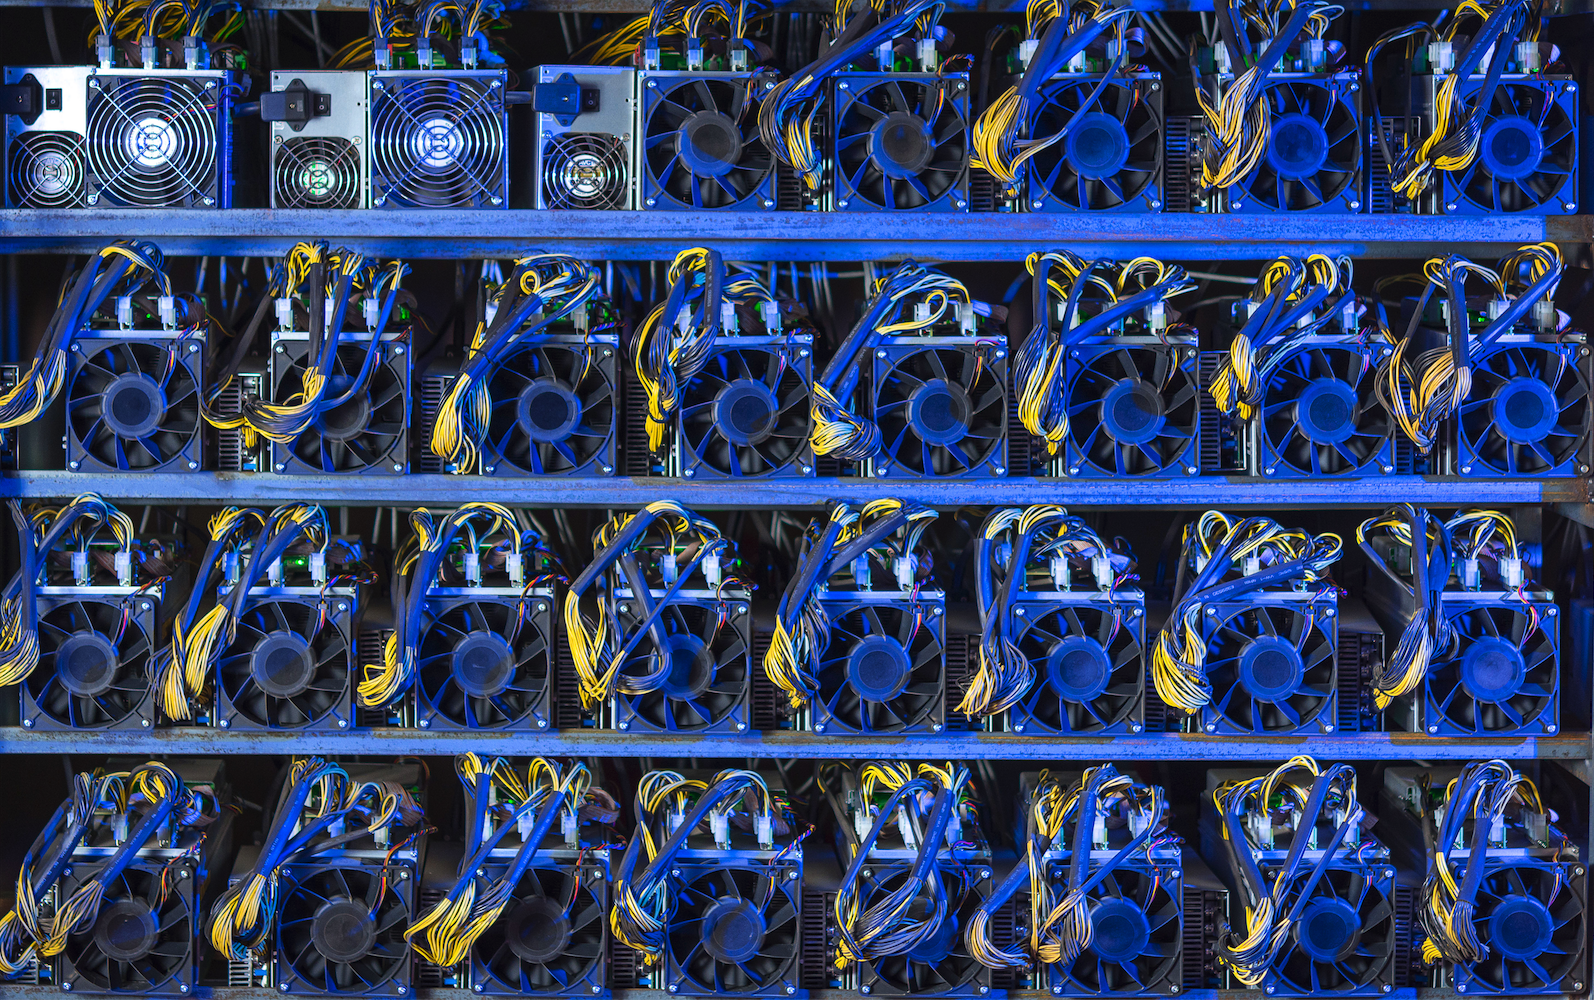 Cryptocurrency Mining Up for Elimination In China for Being Wasteful and 'Backward'